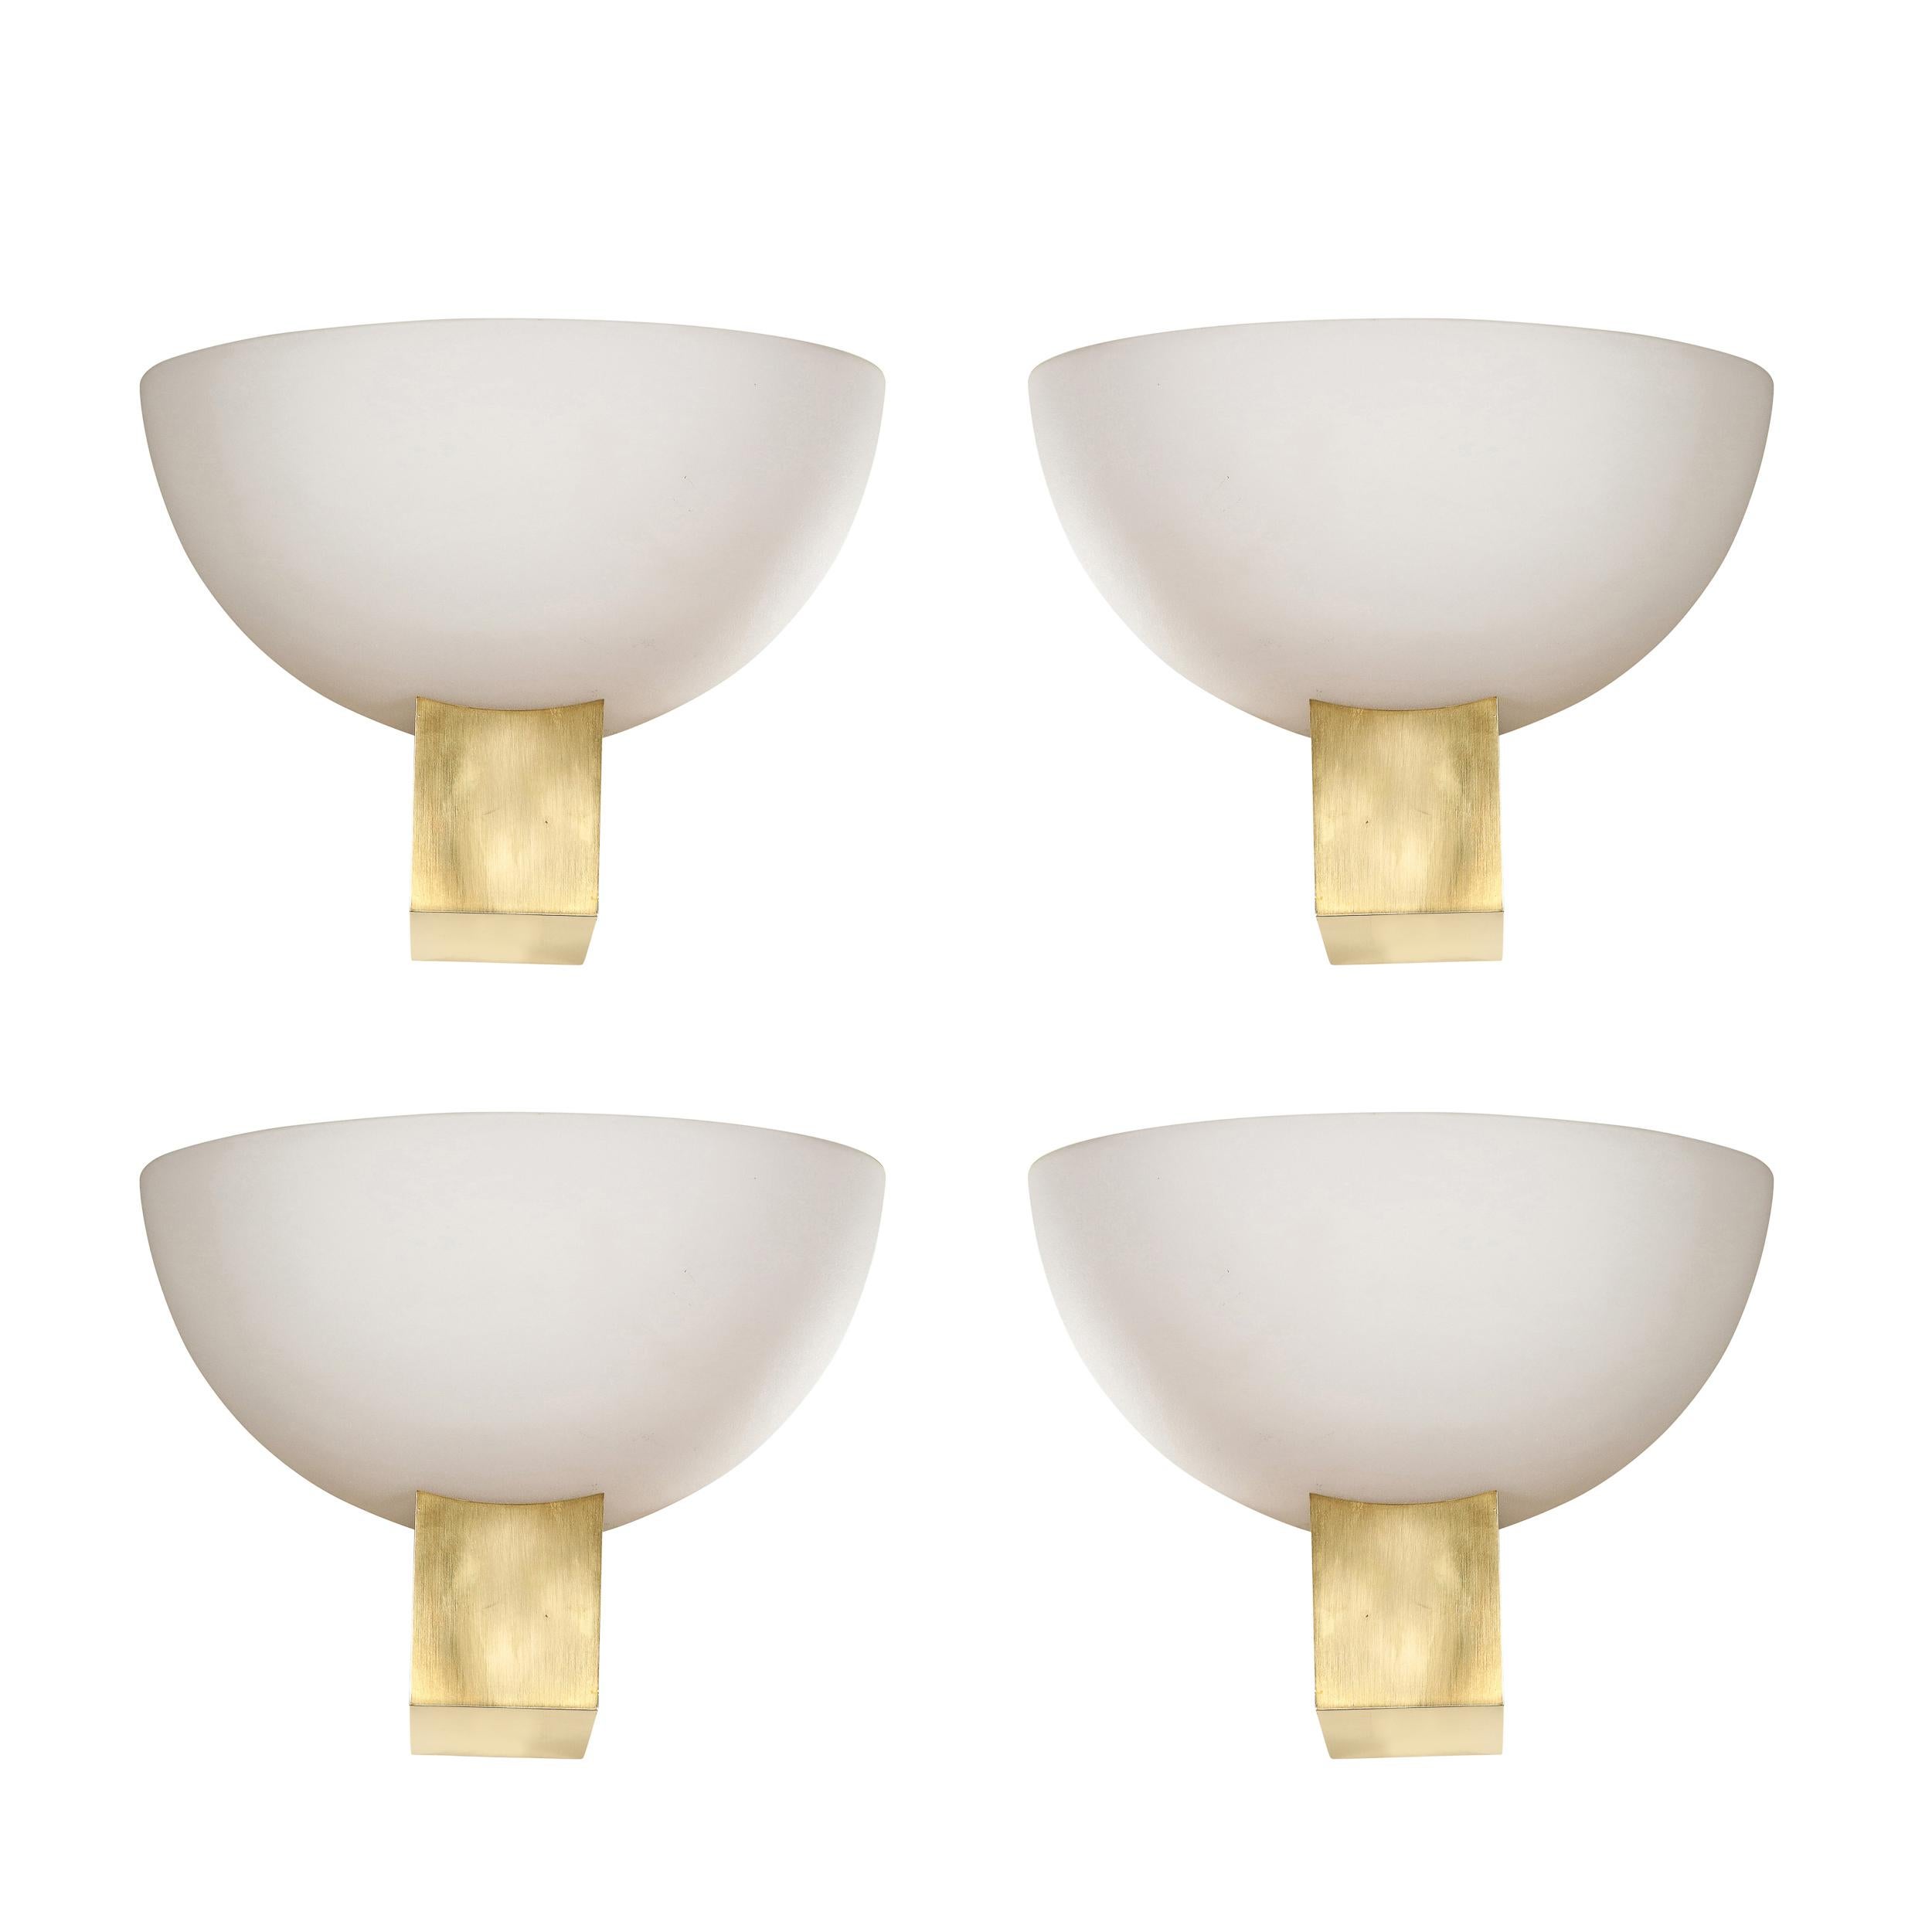 This sophisticated and stunning set of four Art Deco brass and frosted glass reverse dome sconces were realized by the esteemed atelier of Jean Perzel in France circa 1940. They feature volumetric rectangular bodies in brass that cantilever out from